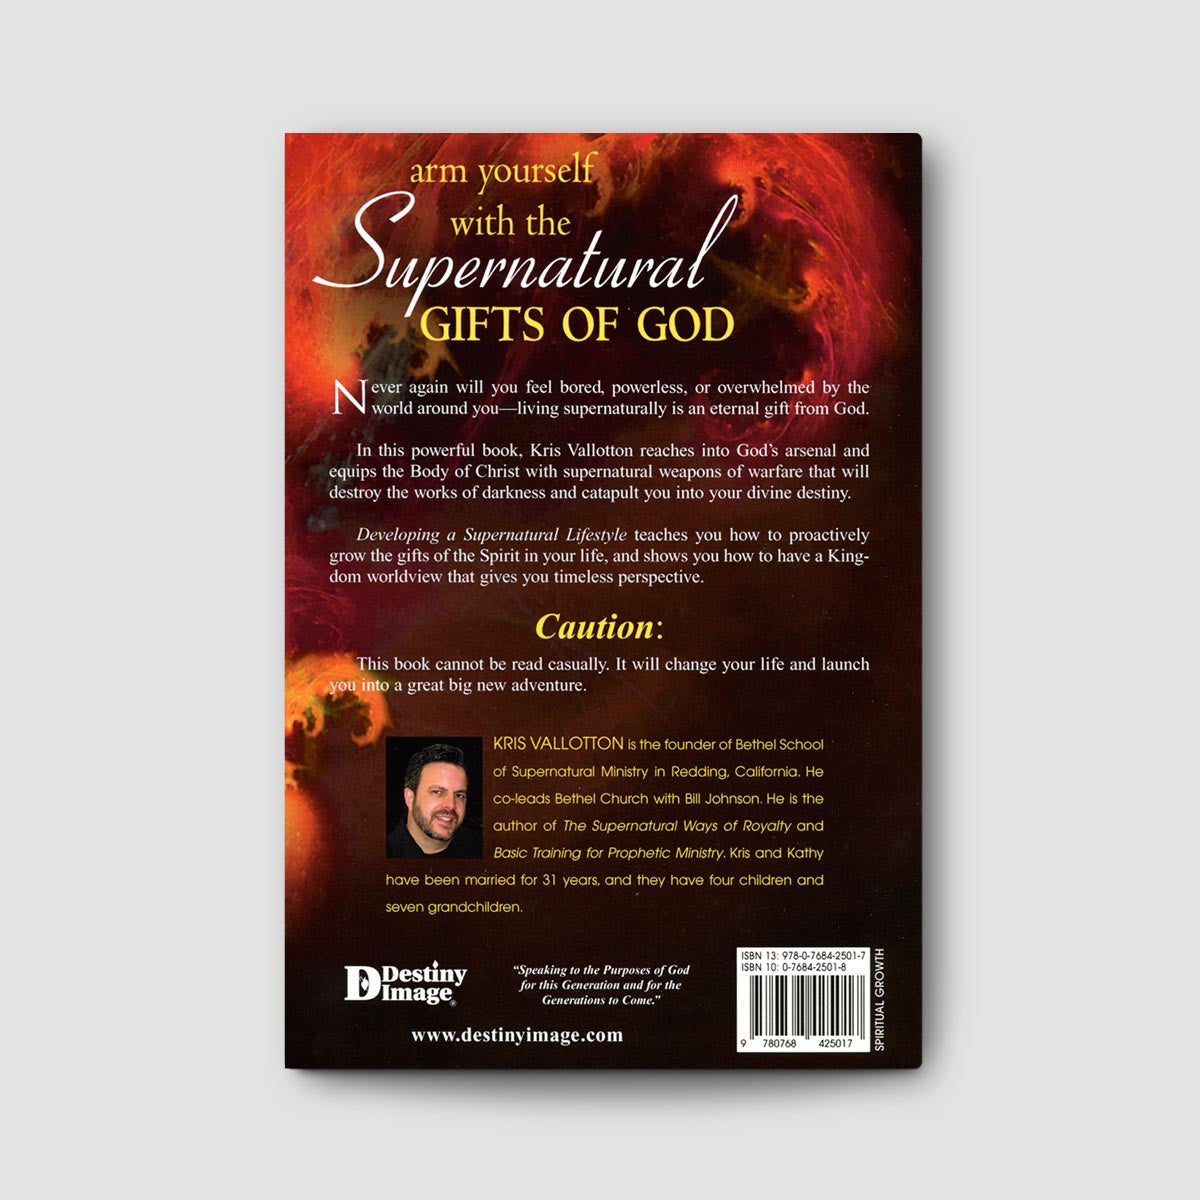 Developing A Supernatural Lifestyle